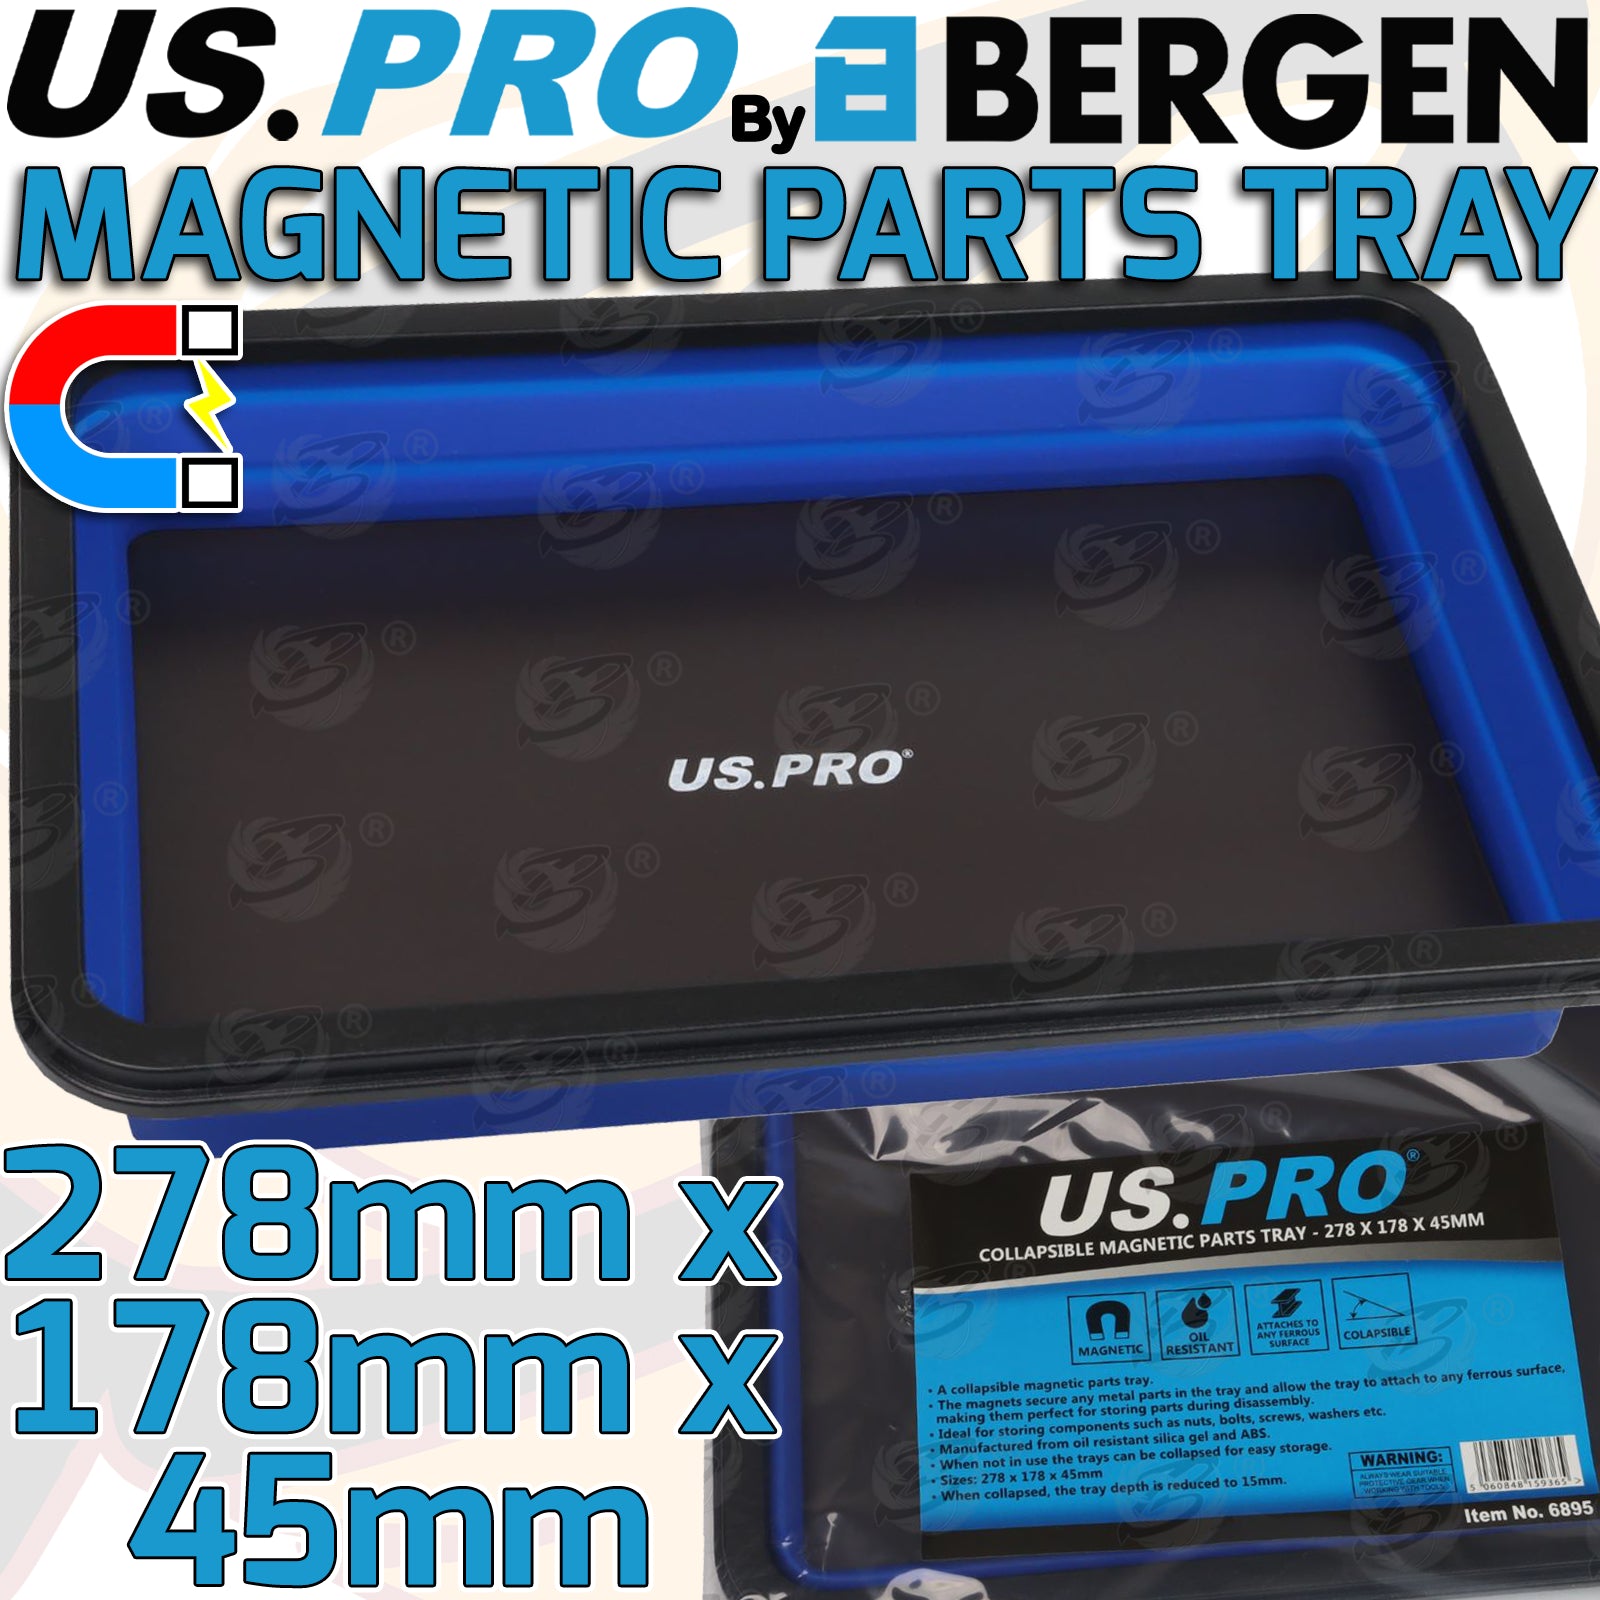 US PRO COLLAPSIBLE MAGNETIC PARTS TRAY ( 278mm x 178mm x 45mm )